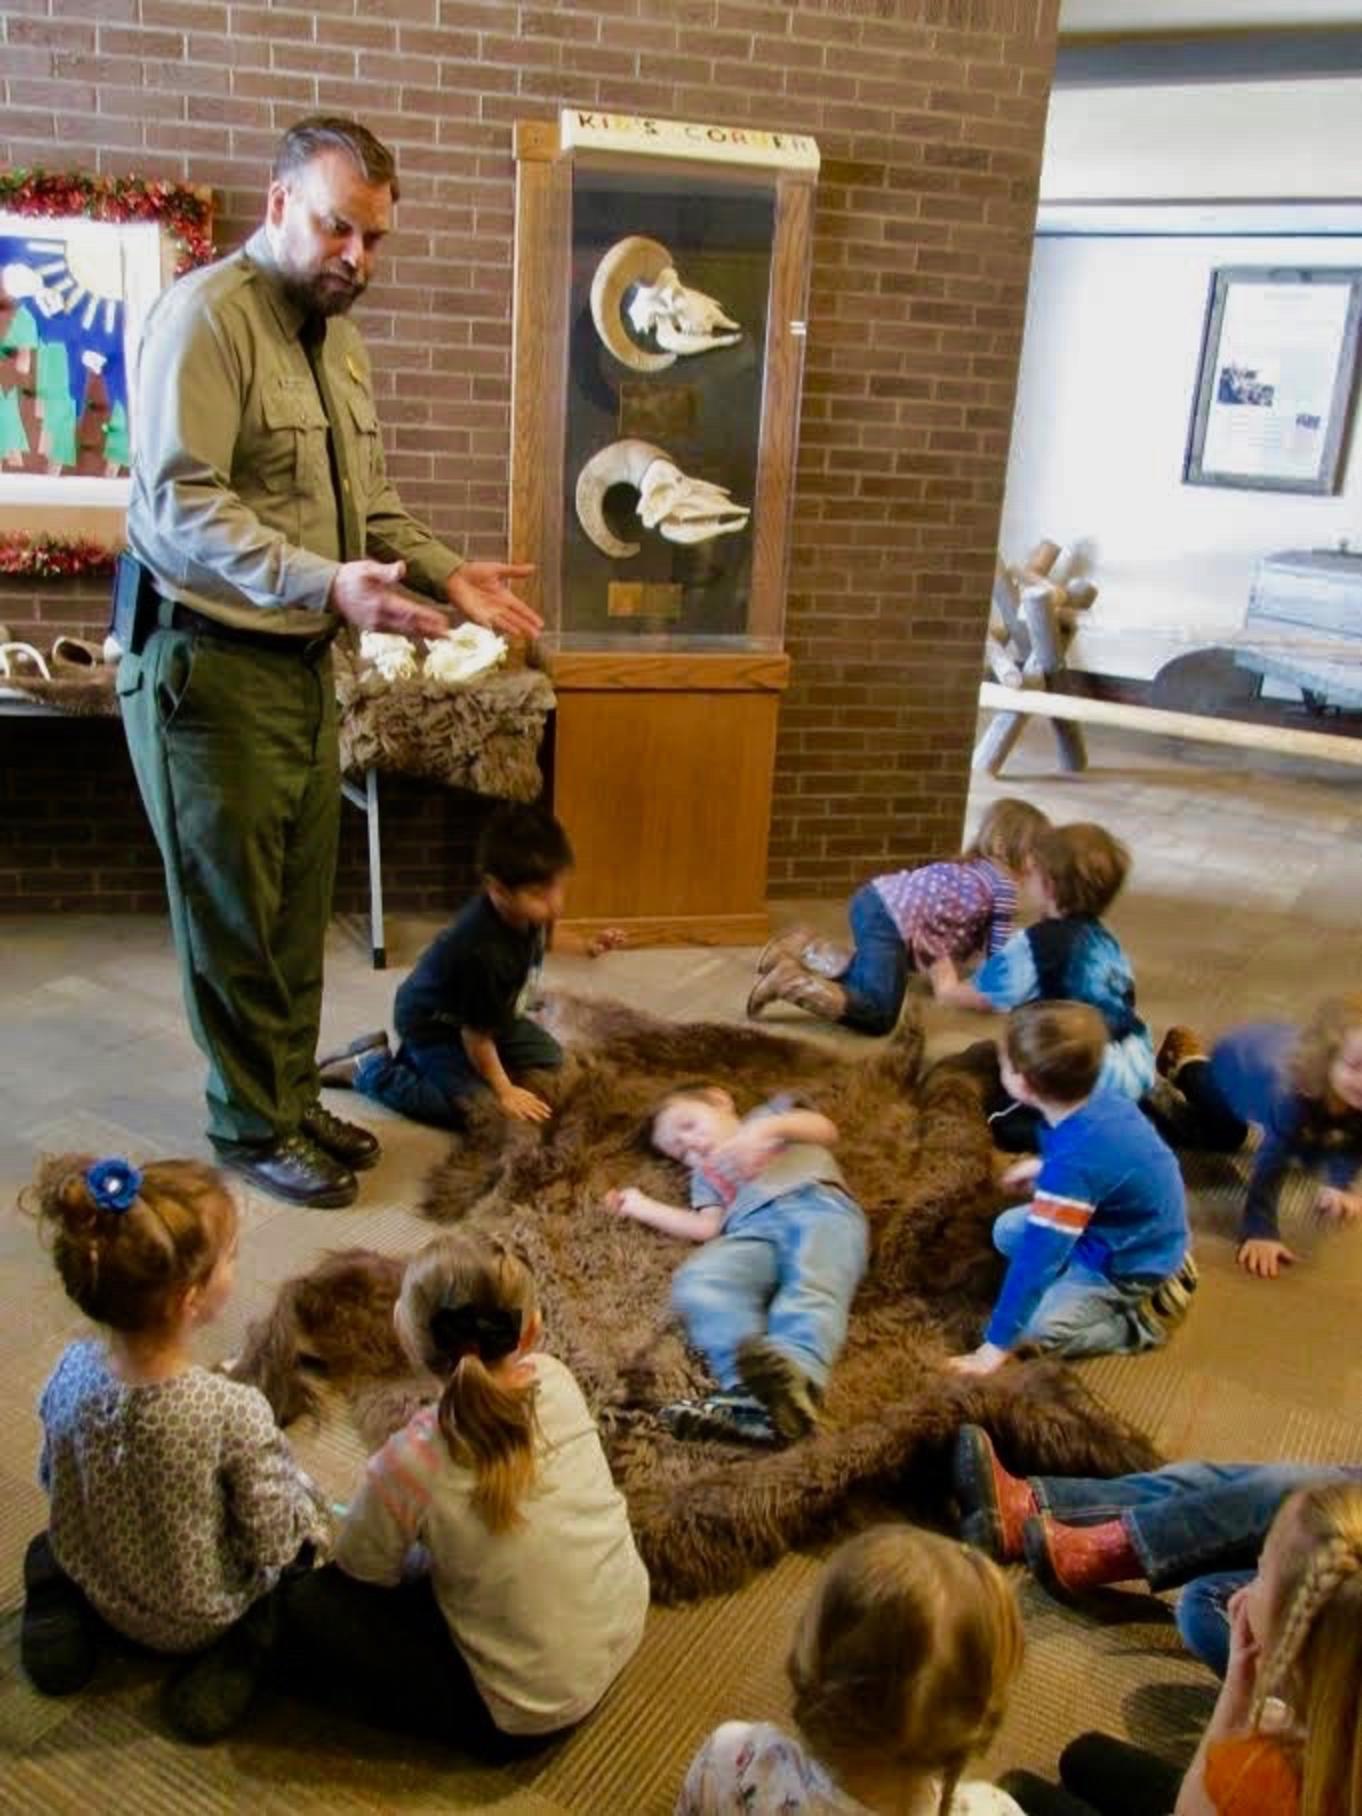 As important as his military career was, Johnson takes his mission on the homefront equally as seriously. Here he's educating local school kids about wildlife, hoping to infect them with what E..O. Wilson calls "biophilia."  Photo courtesy Todd Johnson